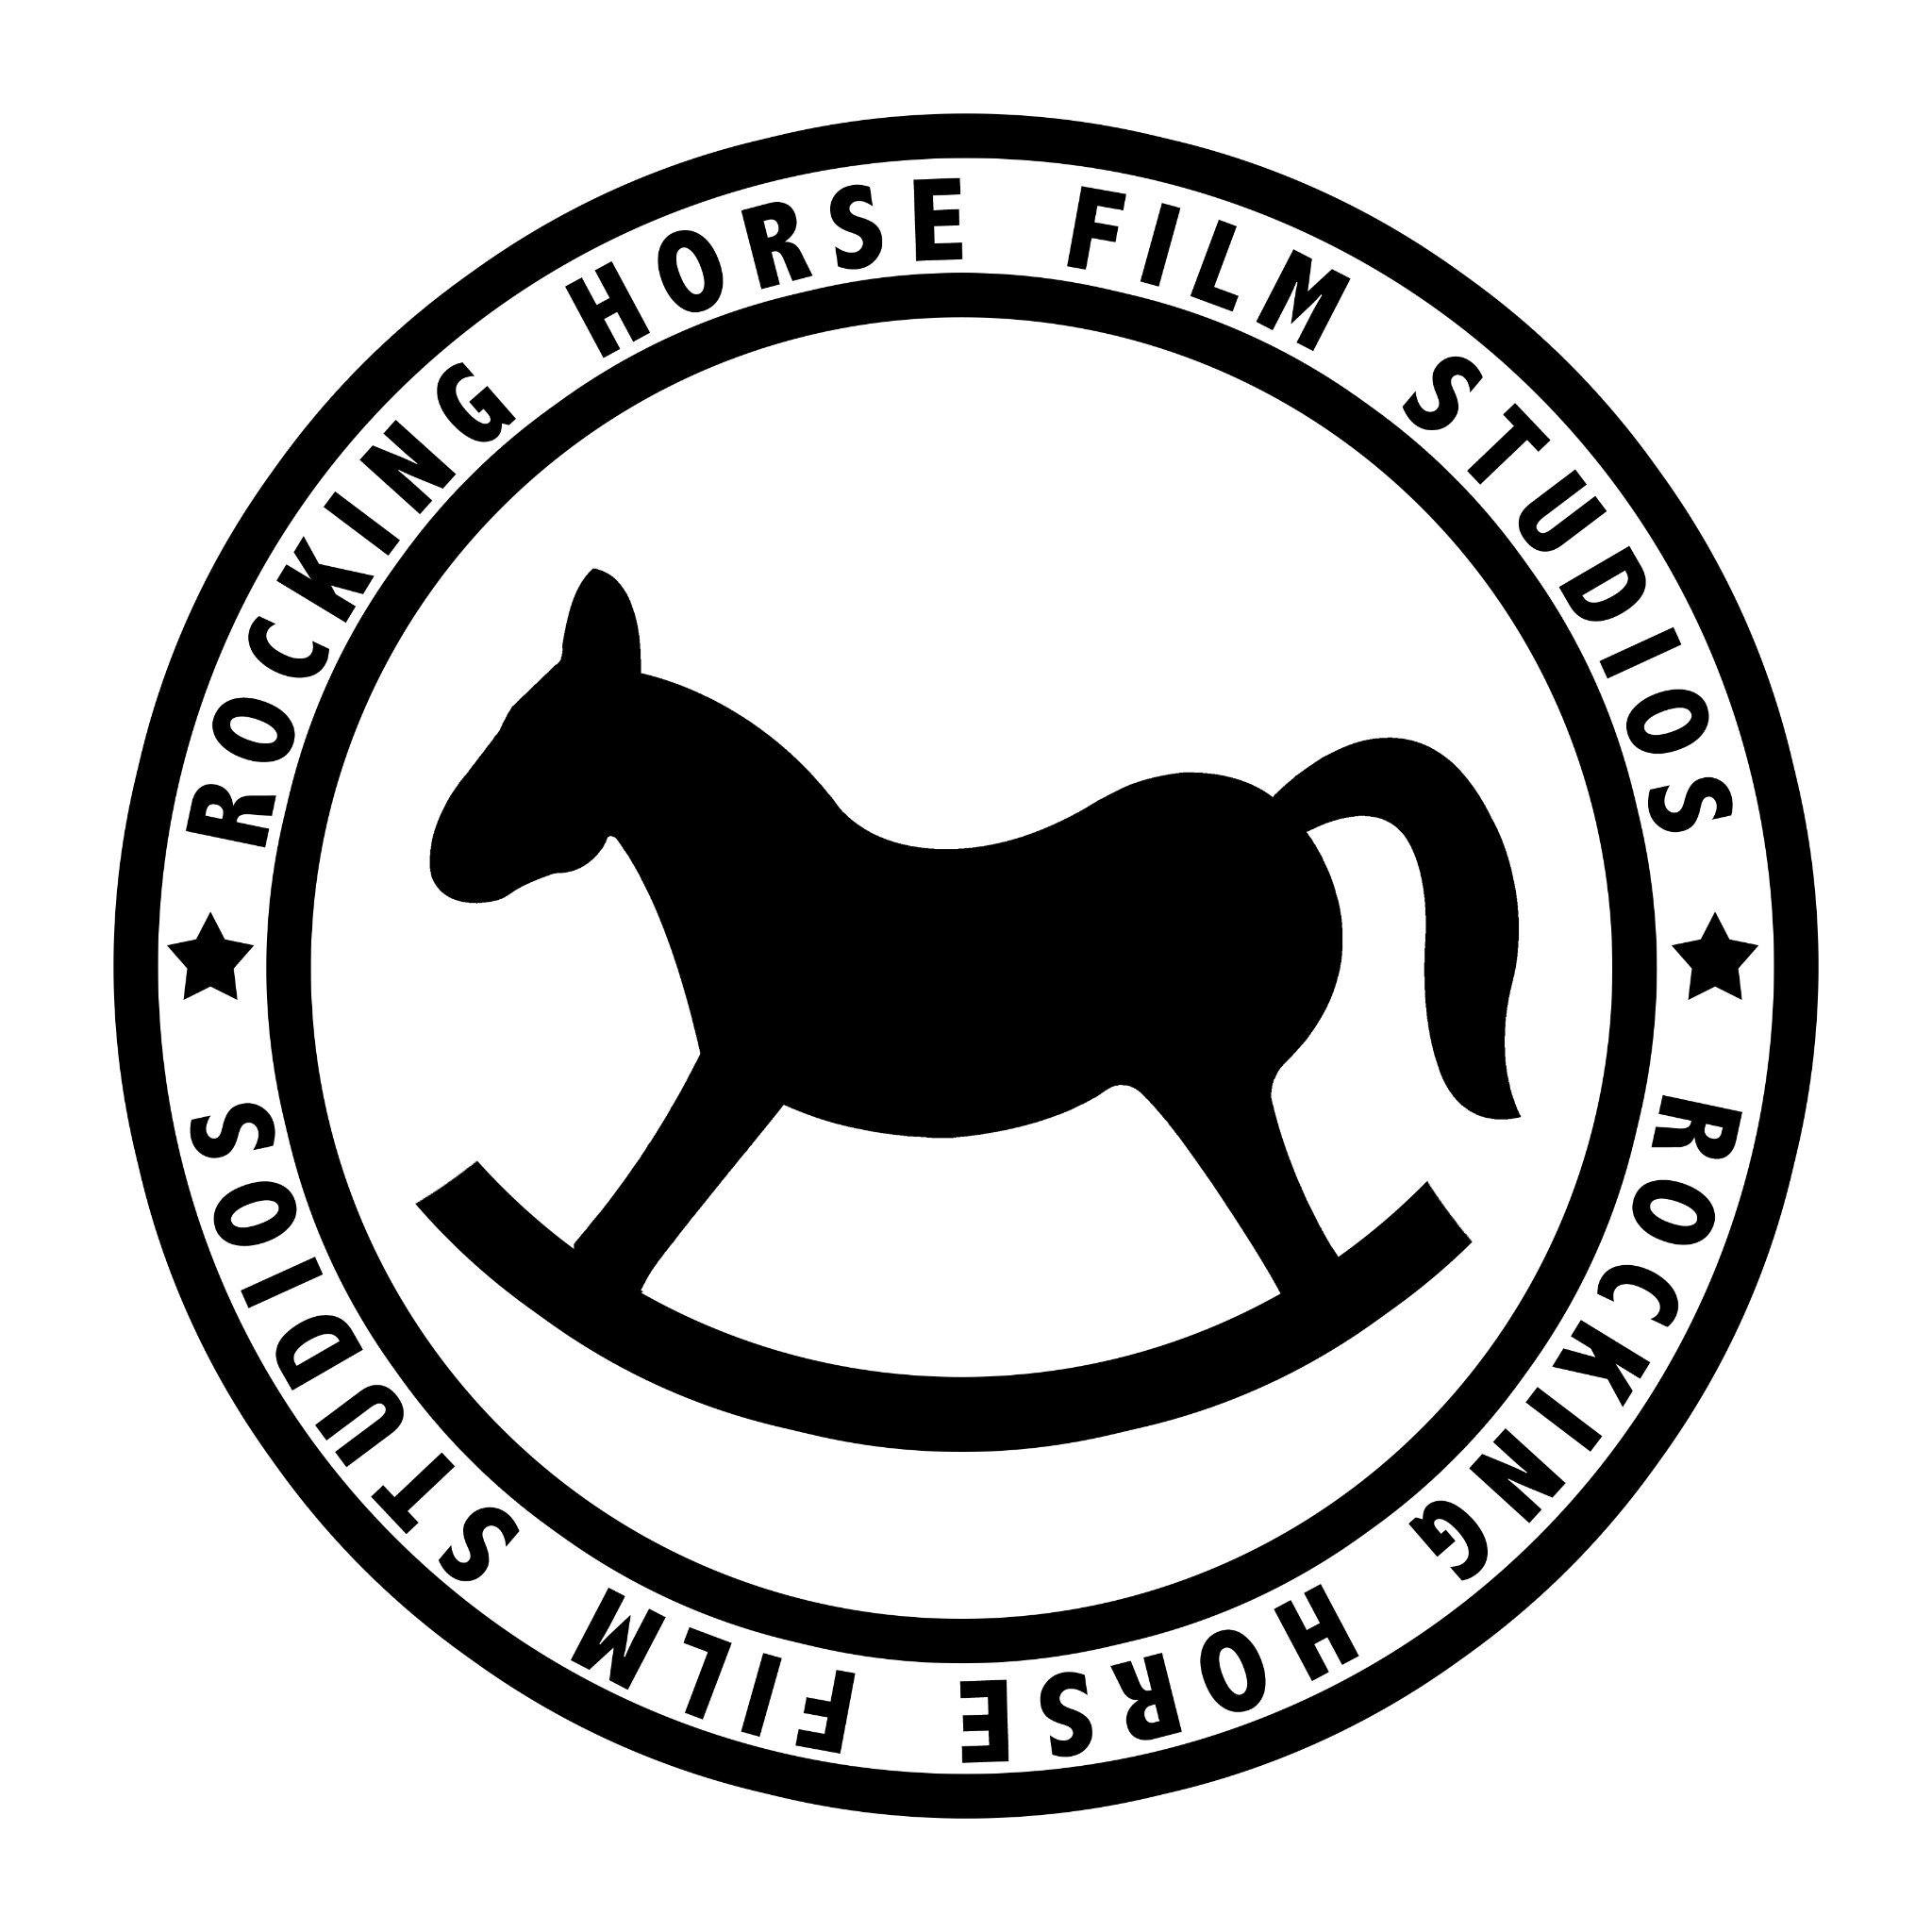 Rocking Horse Film Studios Video Production from Concept, Creation Post Production. We are servicing St. Louis & Metro East areas.